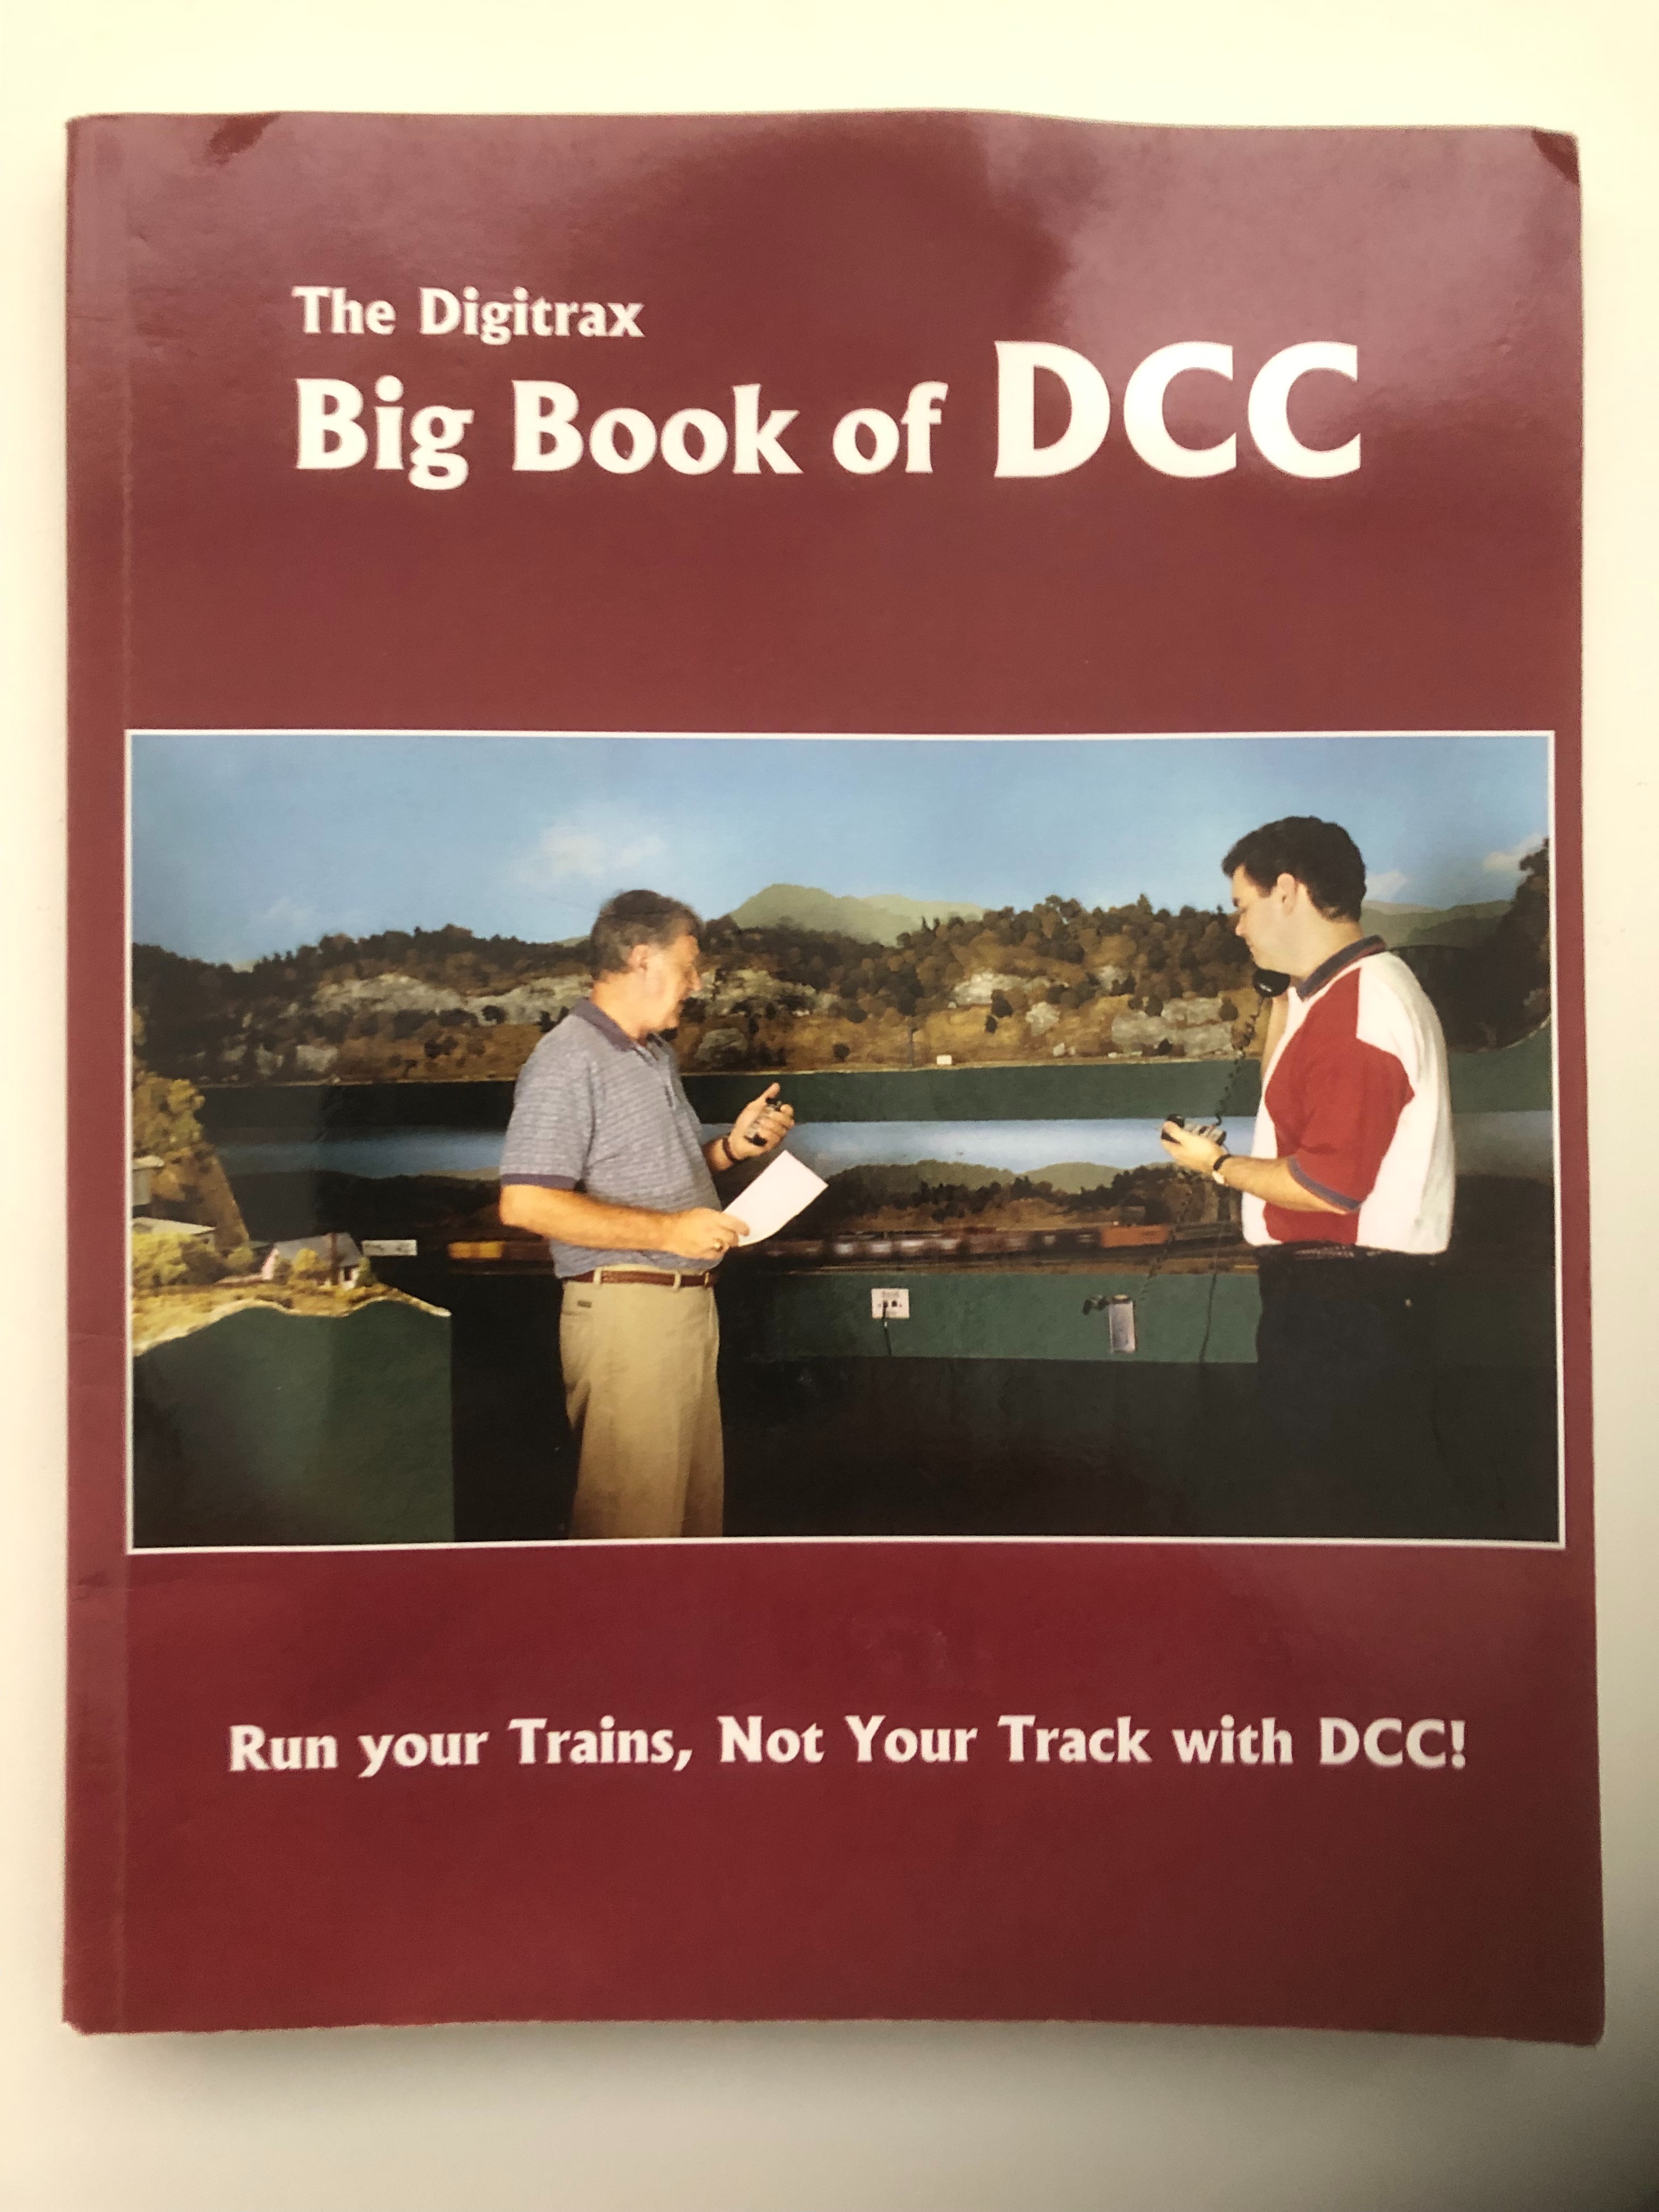 Cover of The Digitrax Big Book of DCC